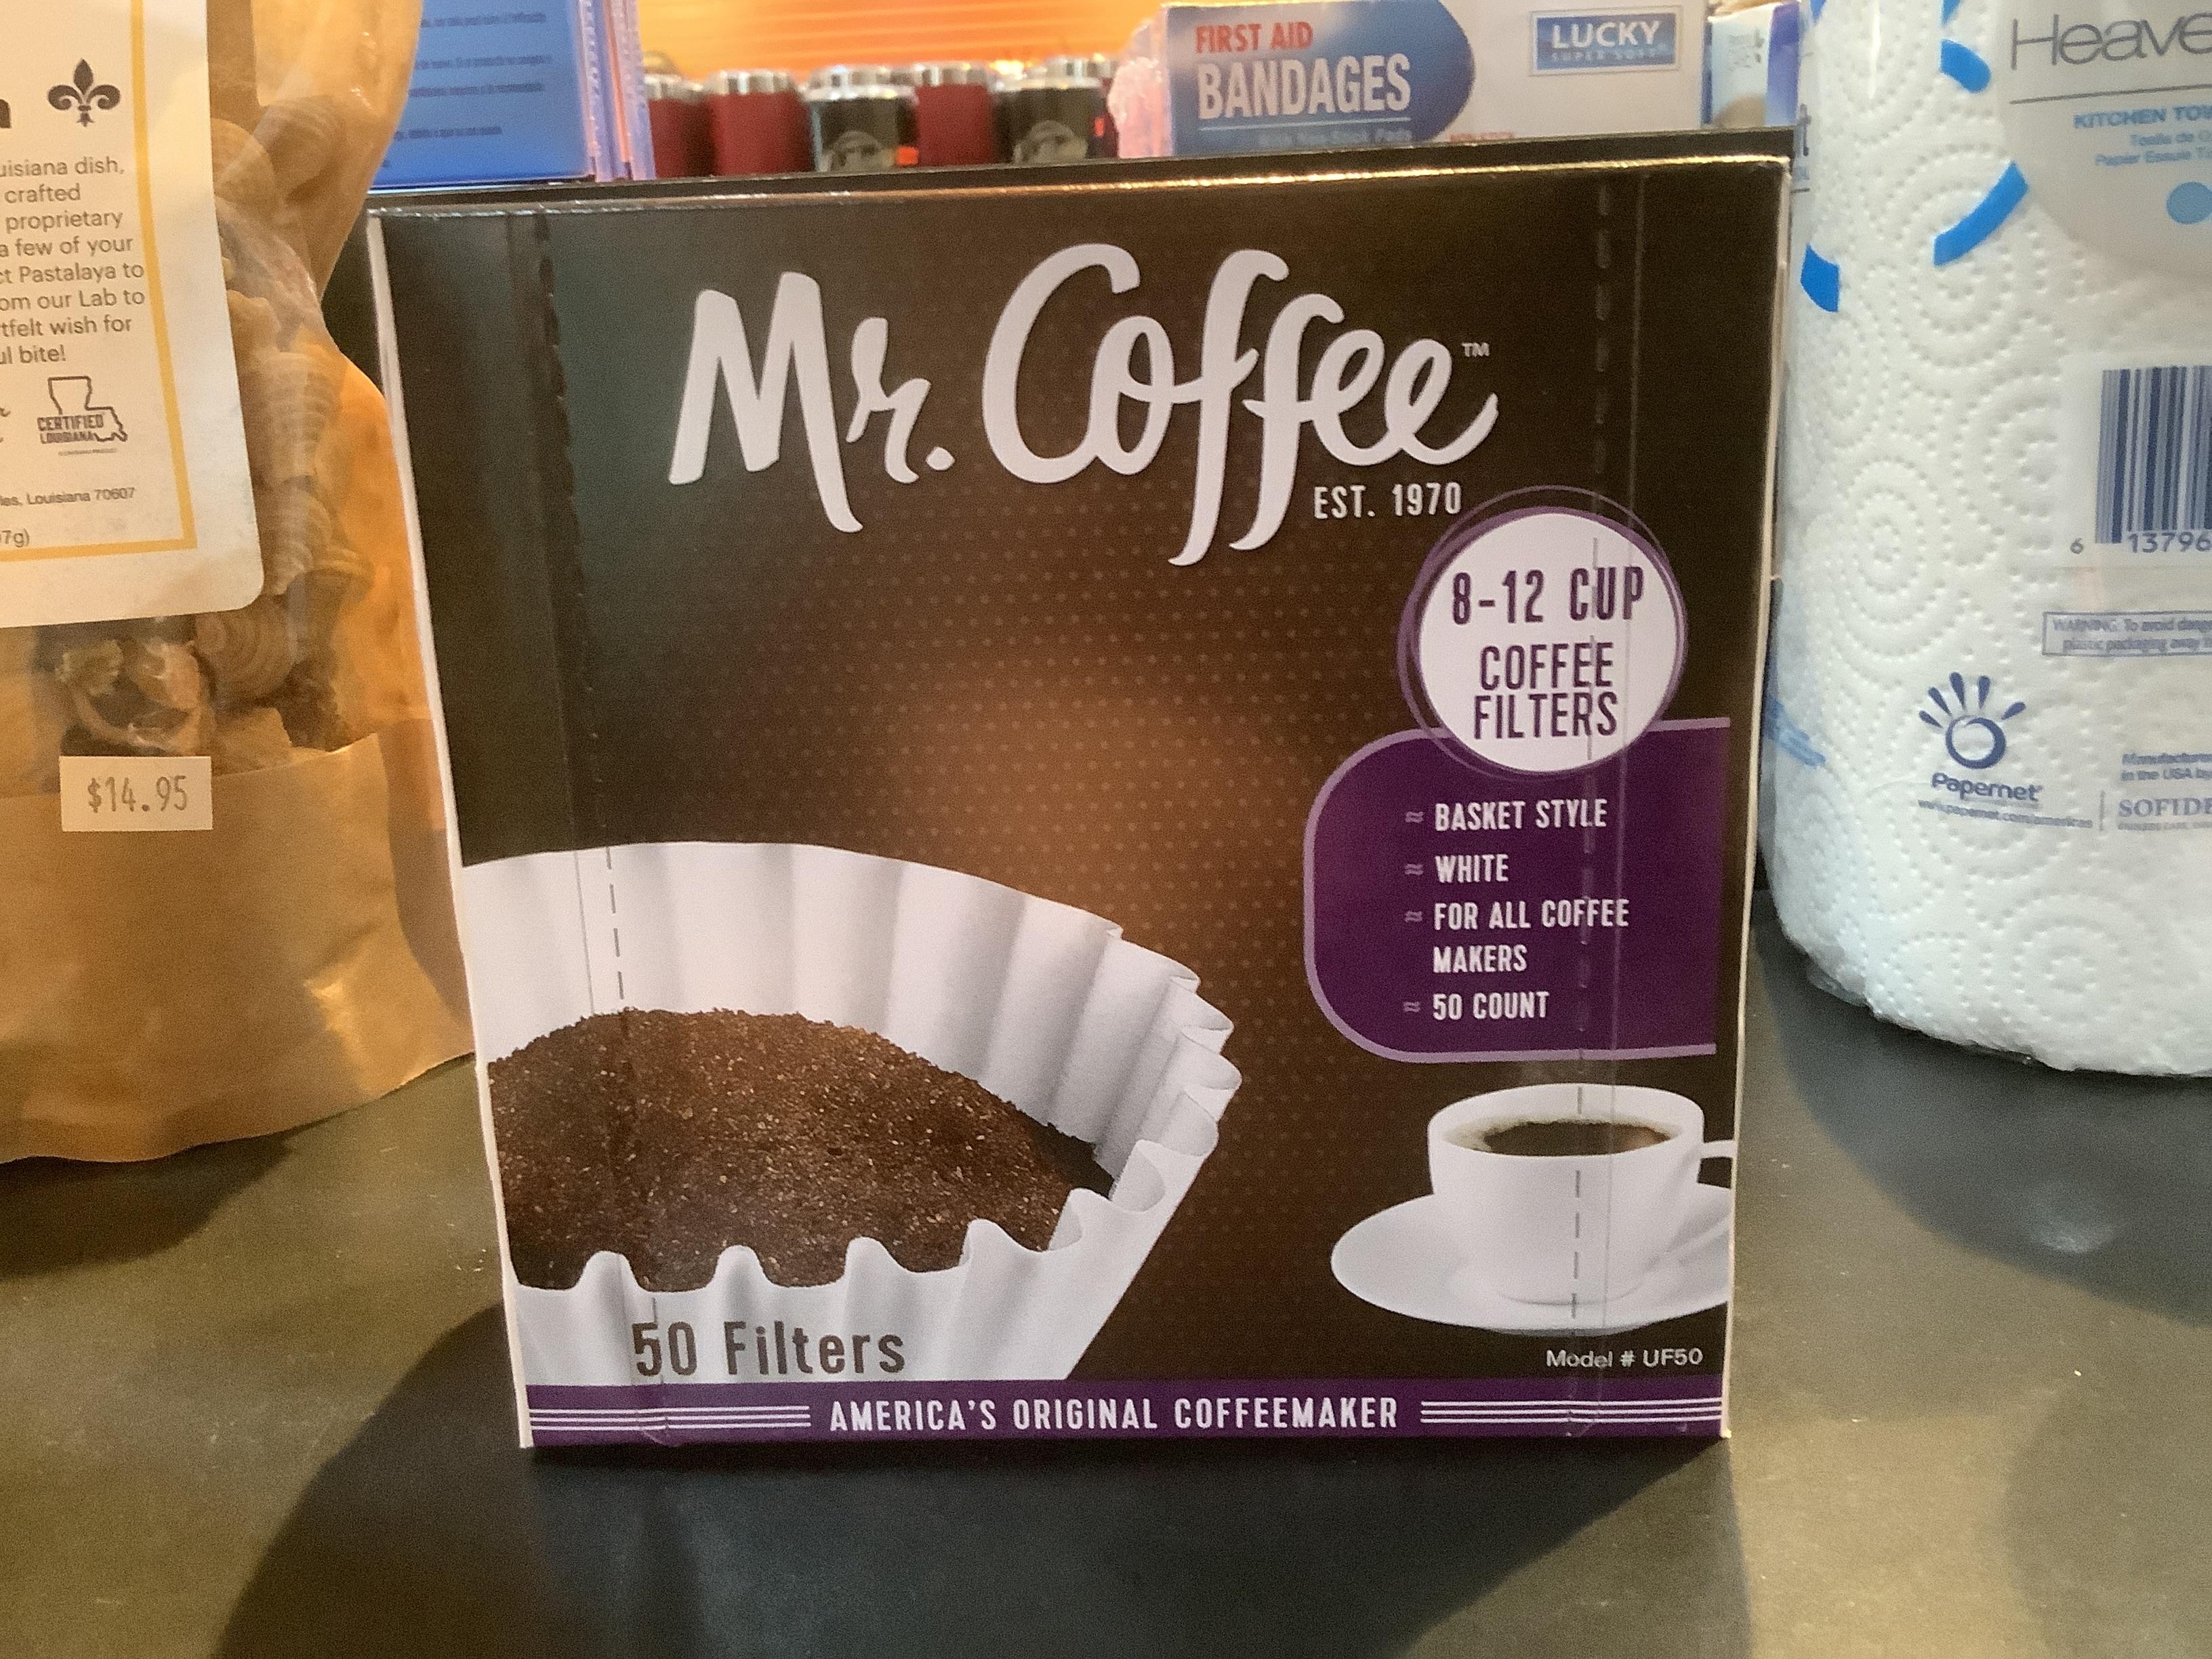 Mr. Coffee 50 filters